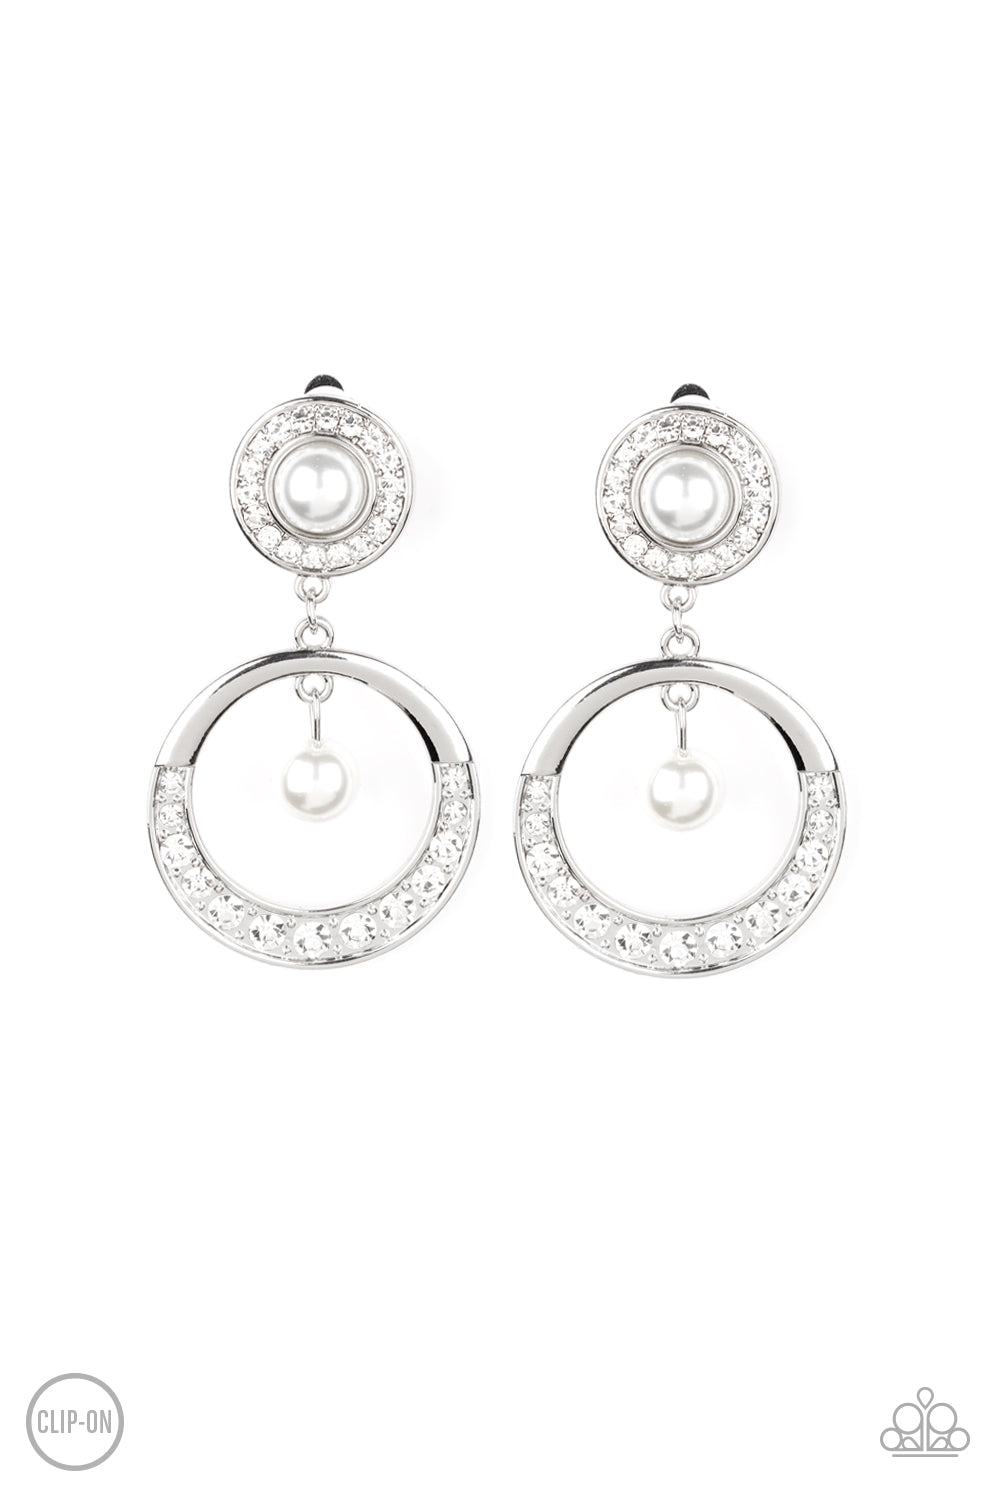 Paparazzi Accessories Royal Revival - White Clip-on Earrings - Lady T Accessories